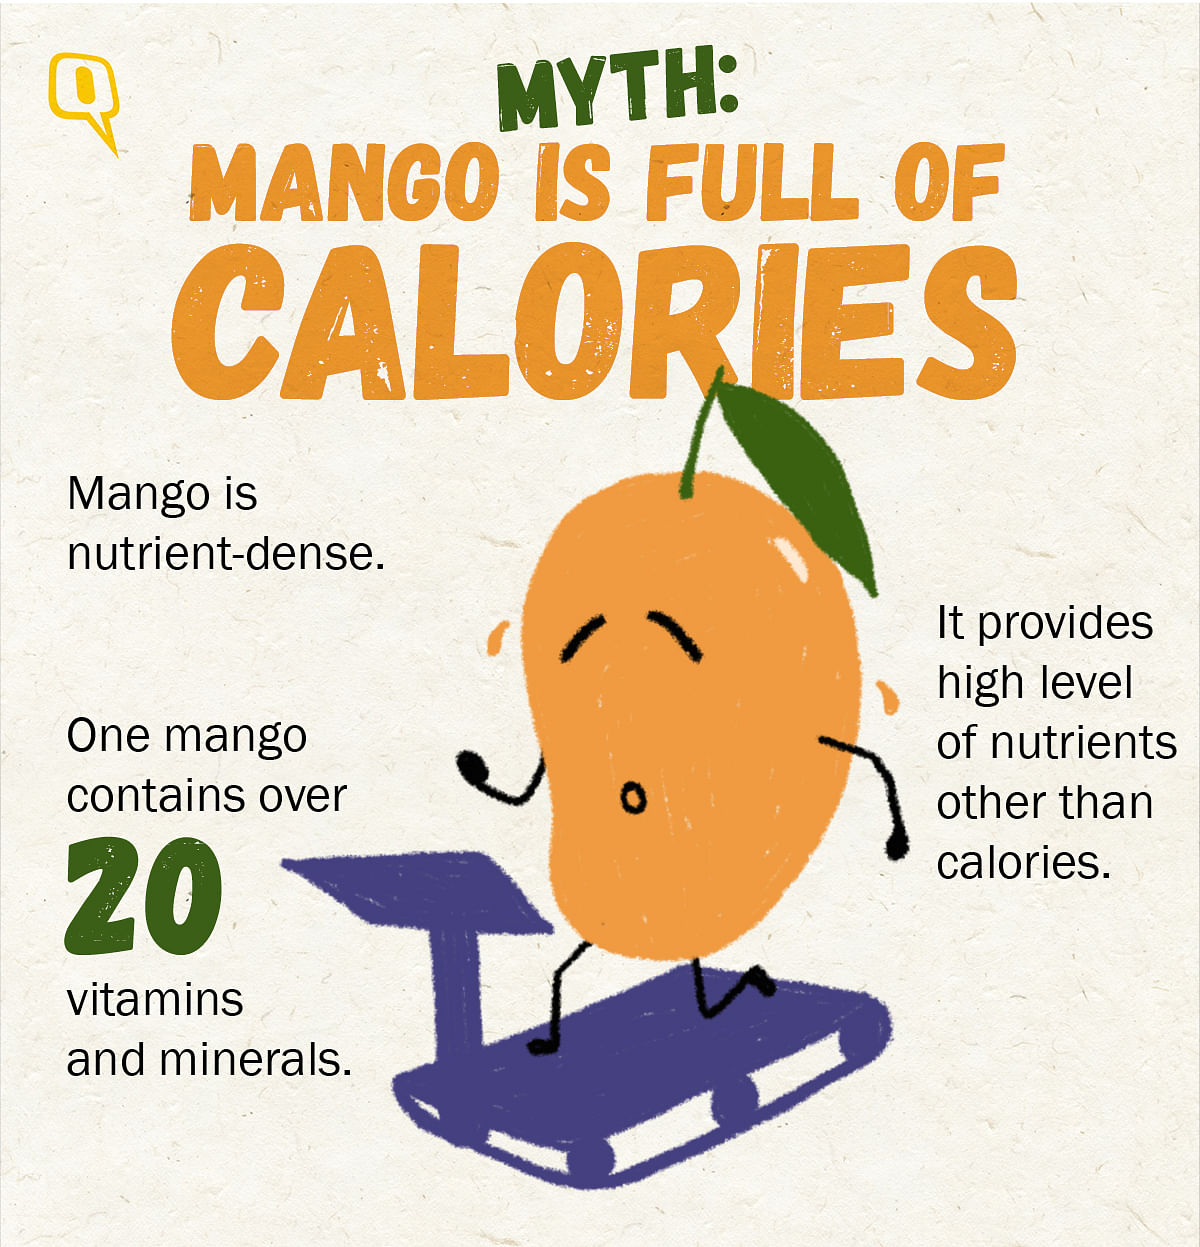 Are mangoes fattening and full of calories? Find out.